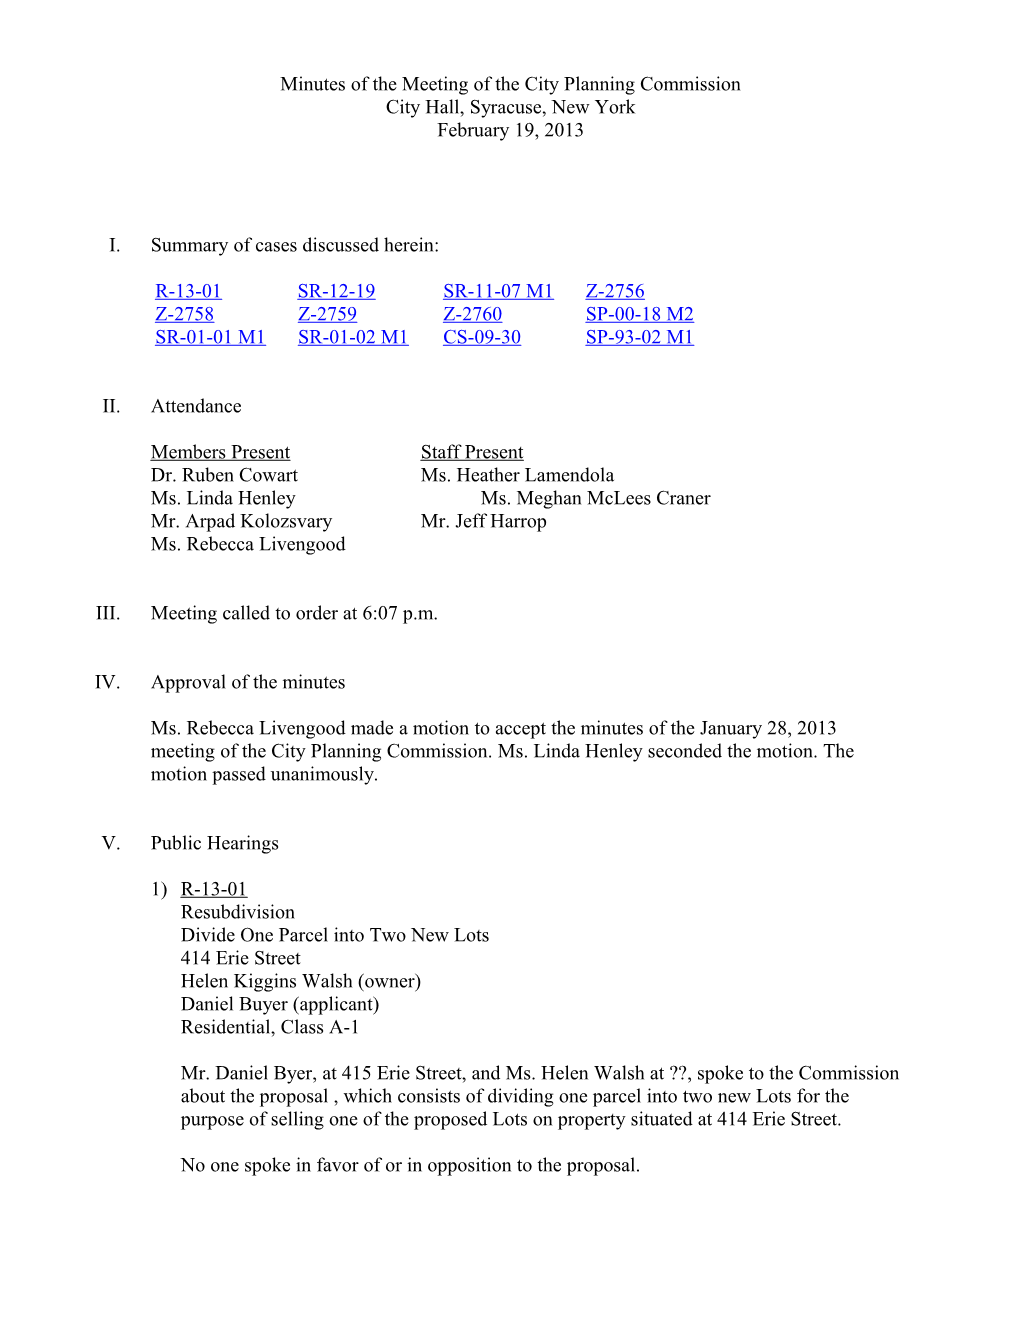 Agenda of the Meeting of Thecity Planning Commission